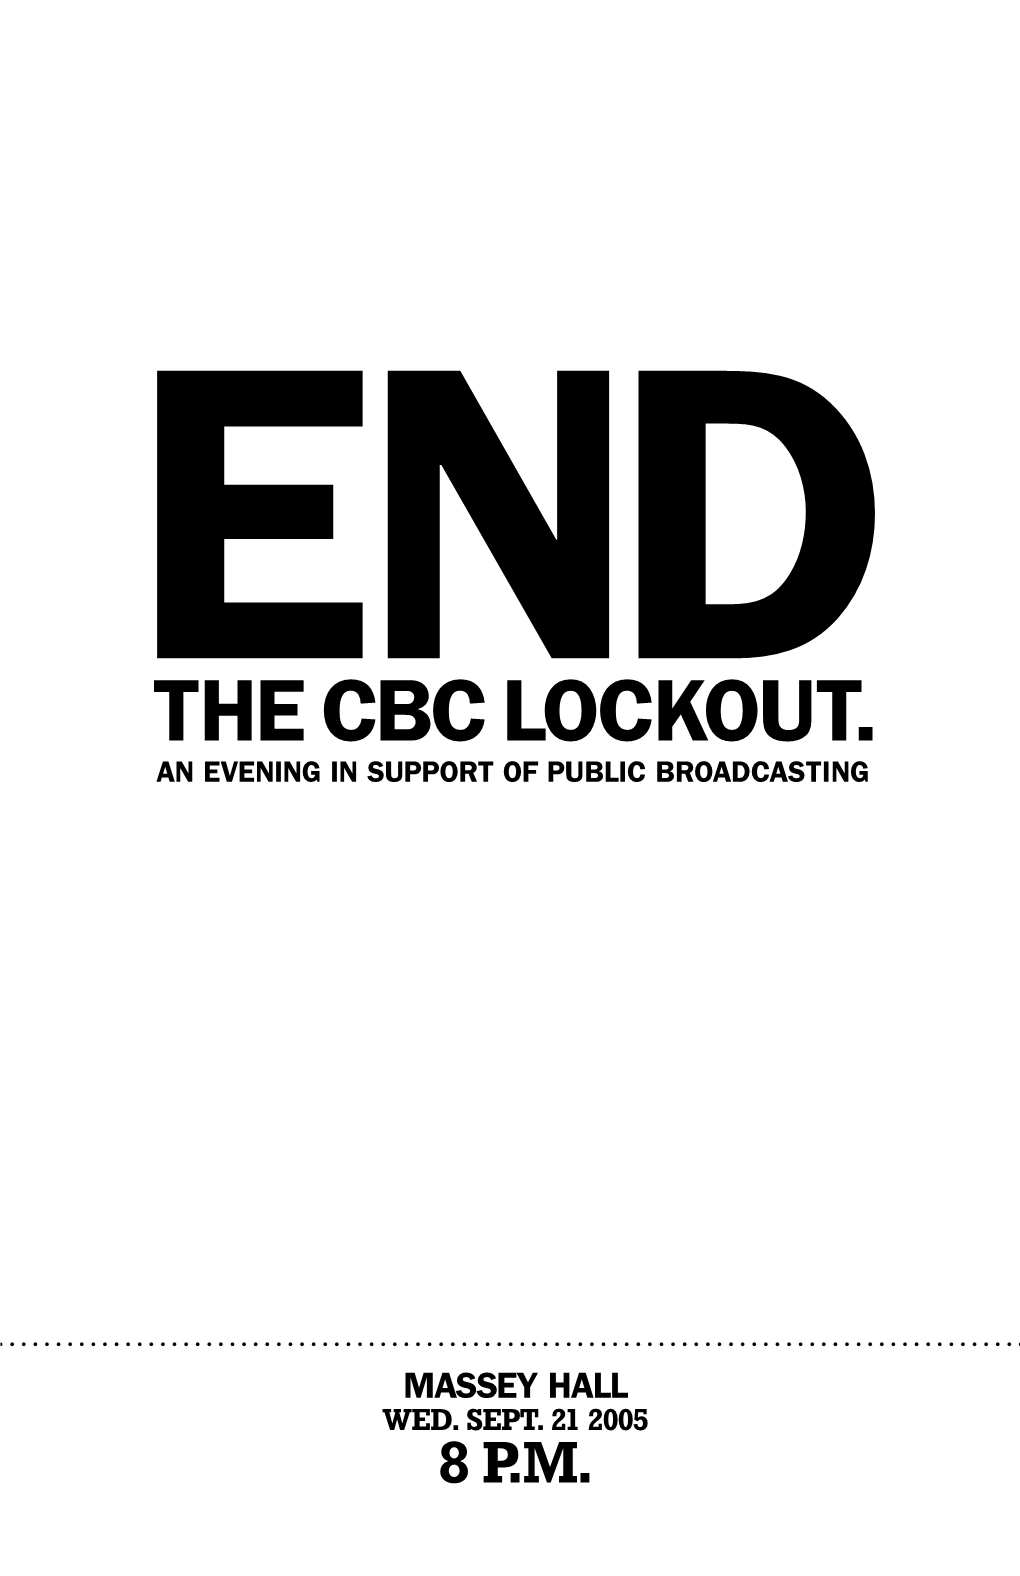 The Cbc Lockout. an Evening in Support of Public Broadcasting